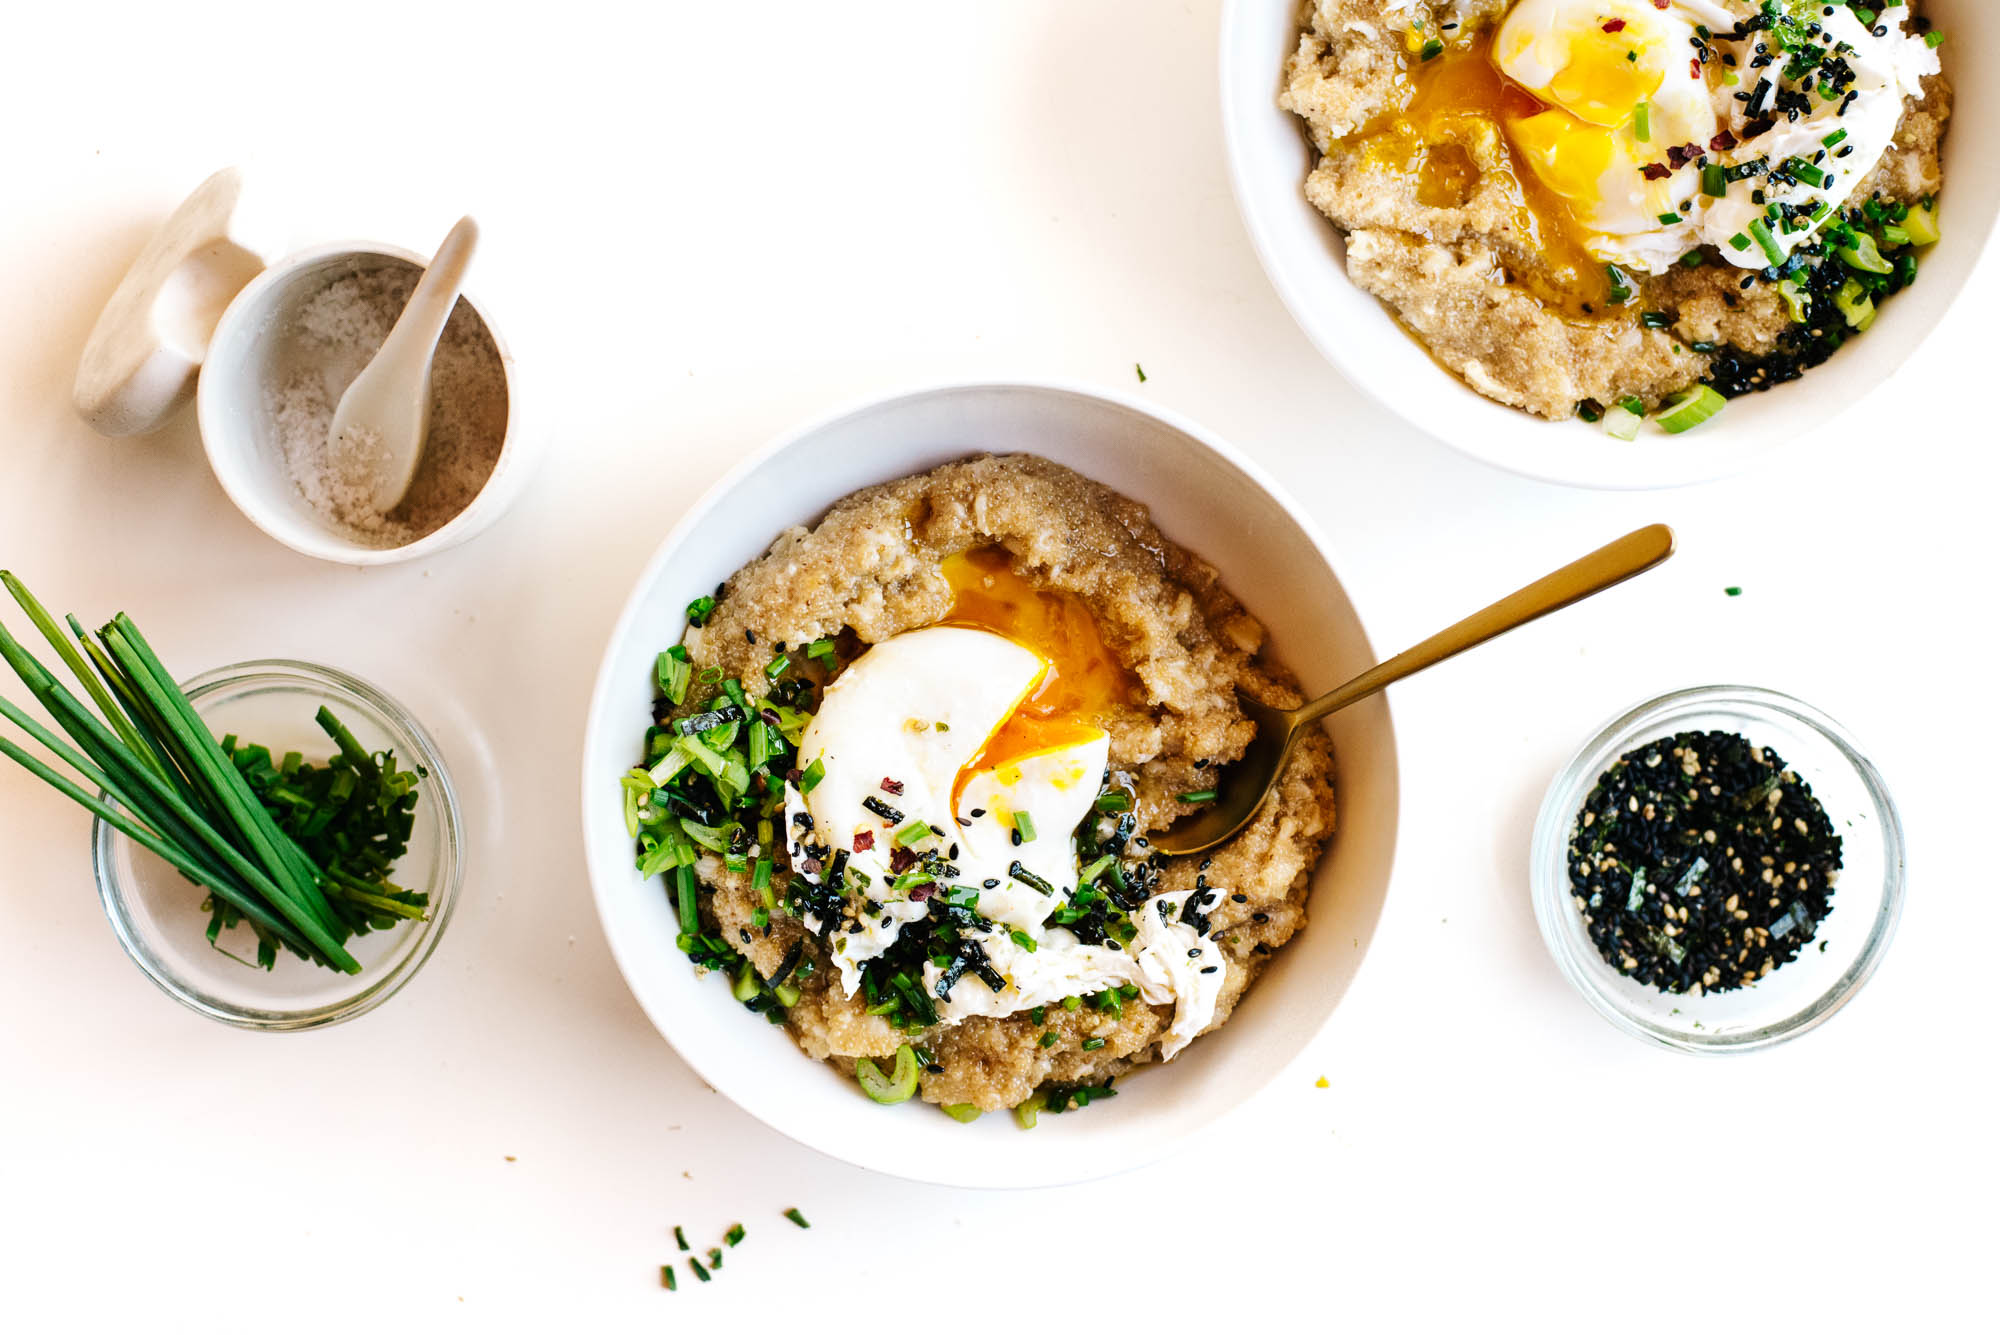 MISO OATS WITH SCALLIONS + SESAME OIL FROM MORE WITH LESS.